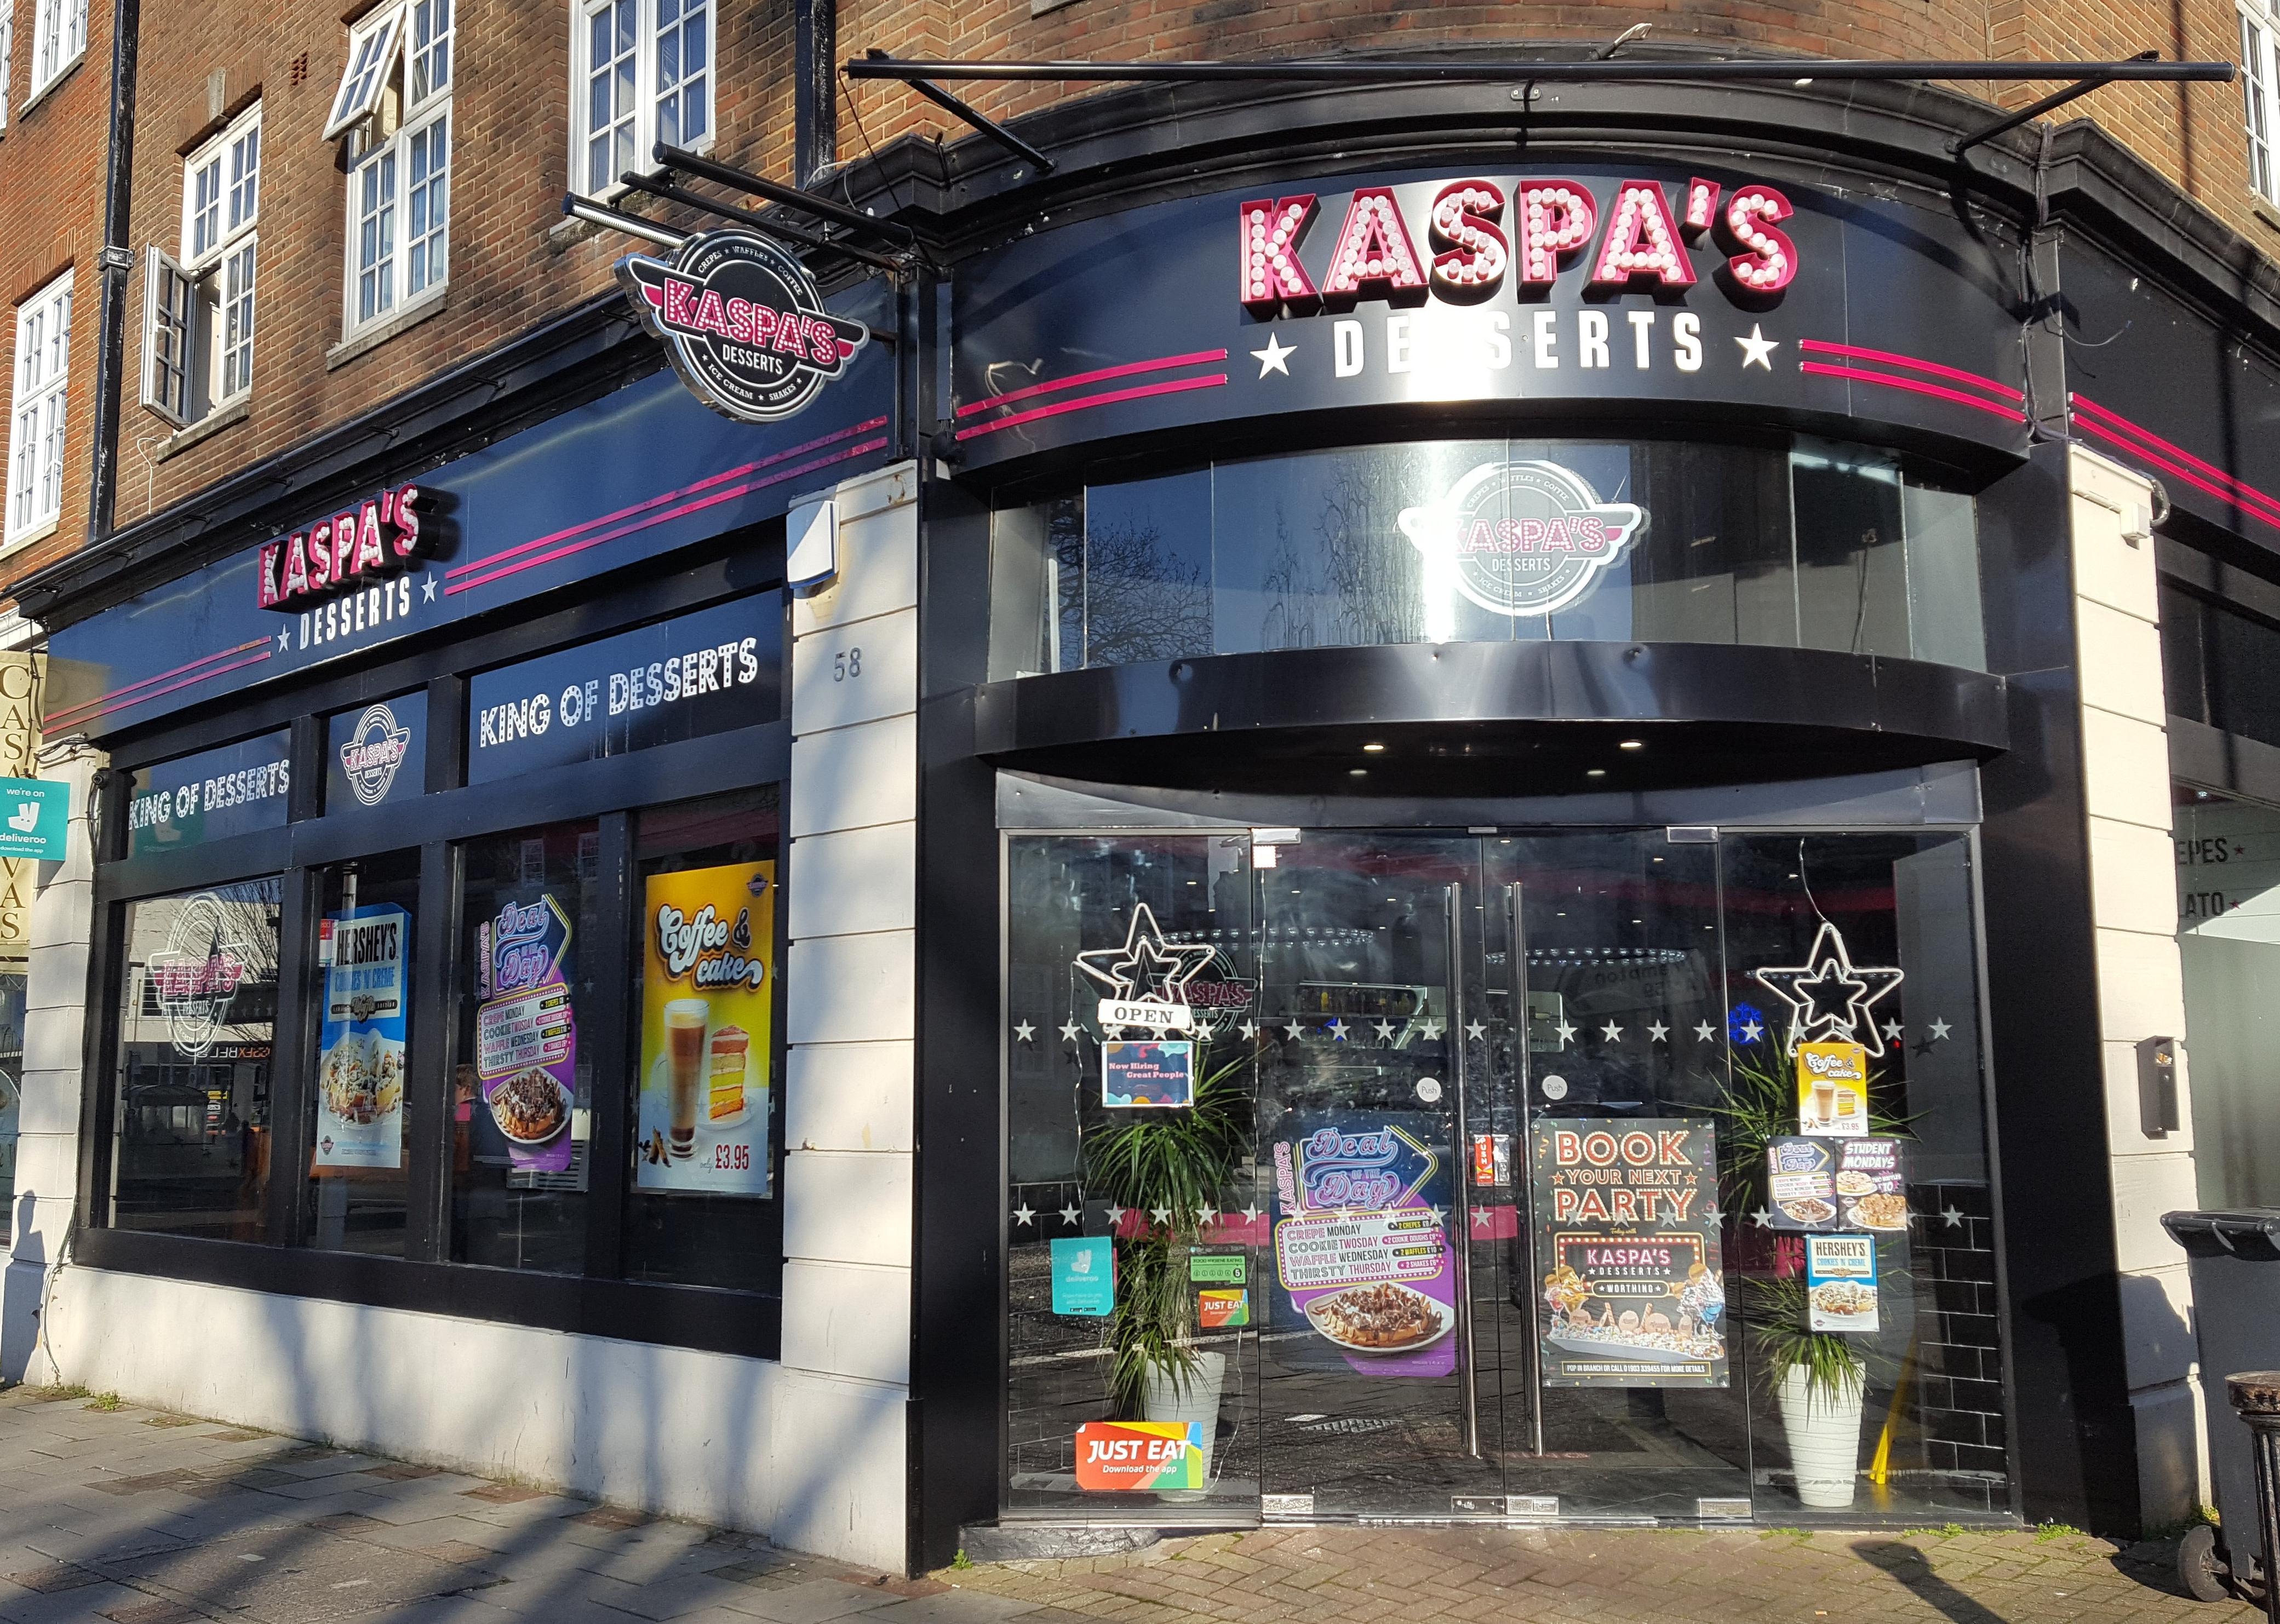 Kaspa's opened in August 2018, offering all the extravagant desserts your Instagram could possibly desire